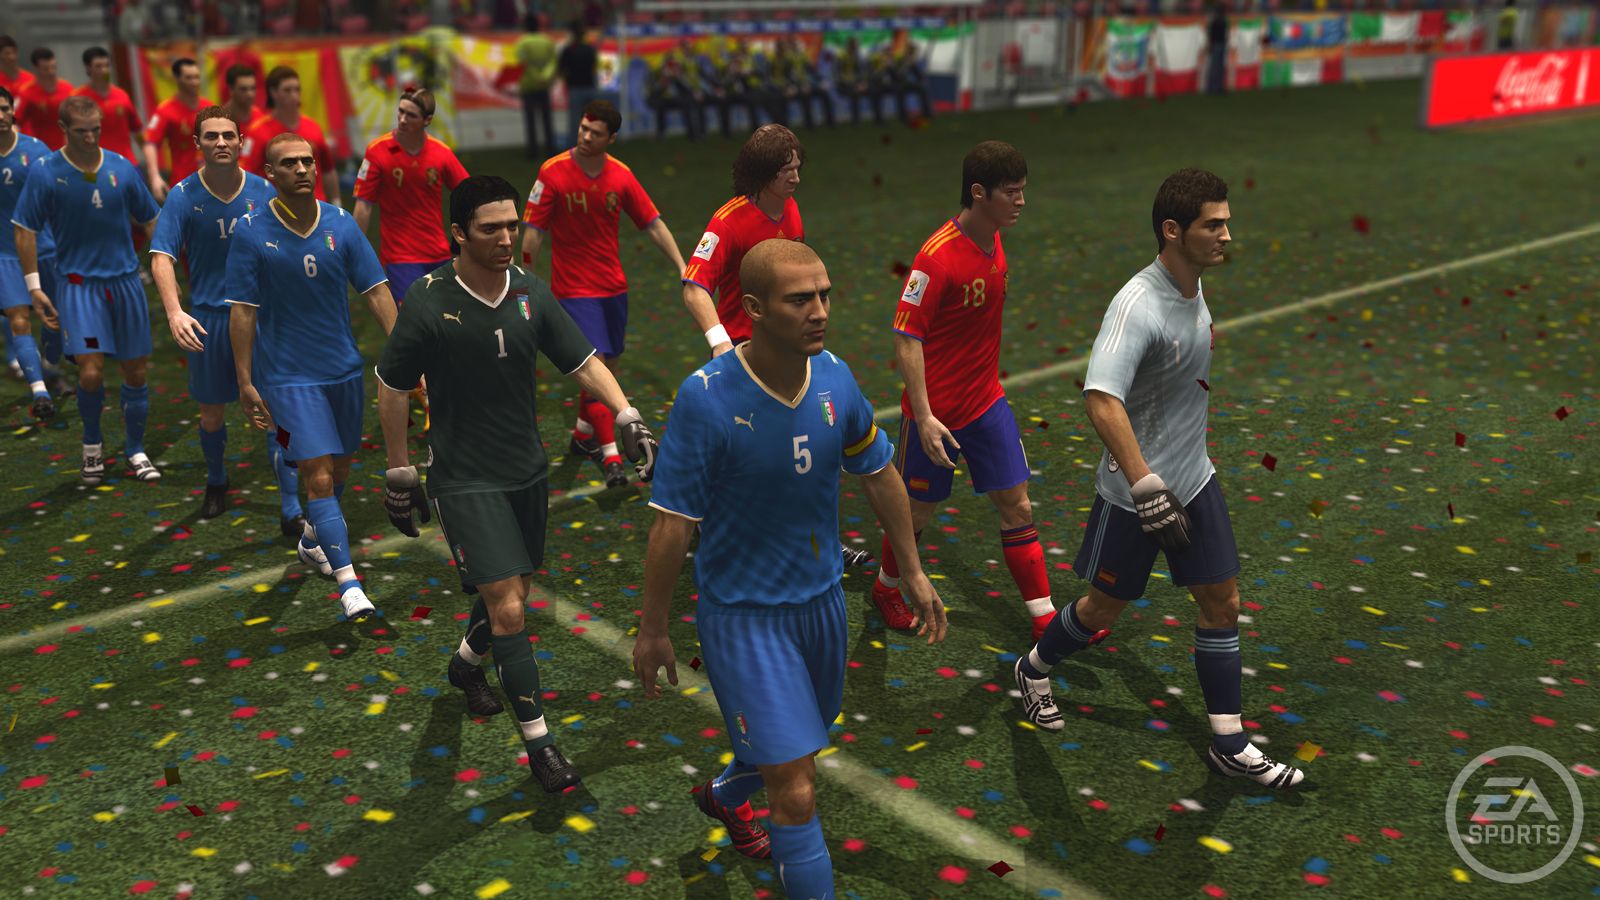  2010 FIFA World Cup South Africa : Video Games